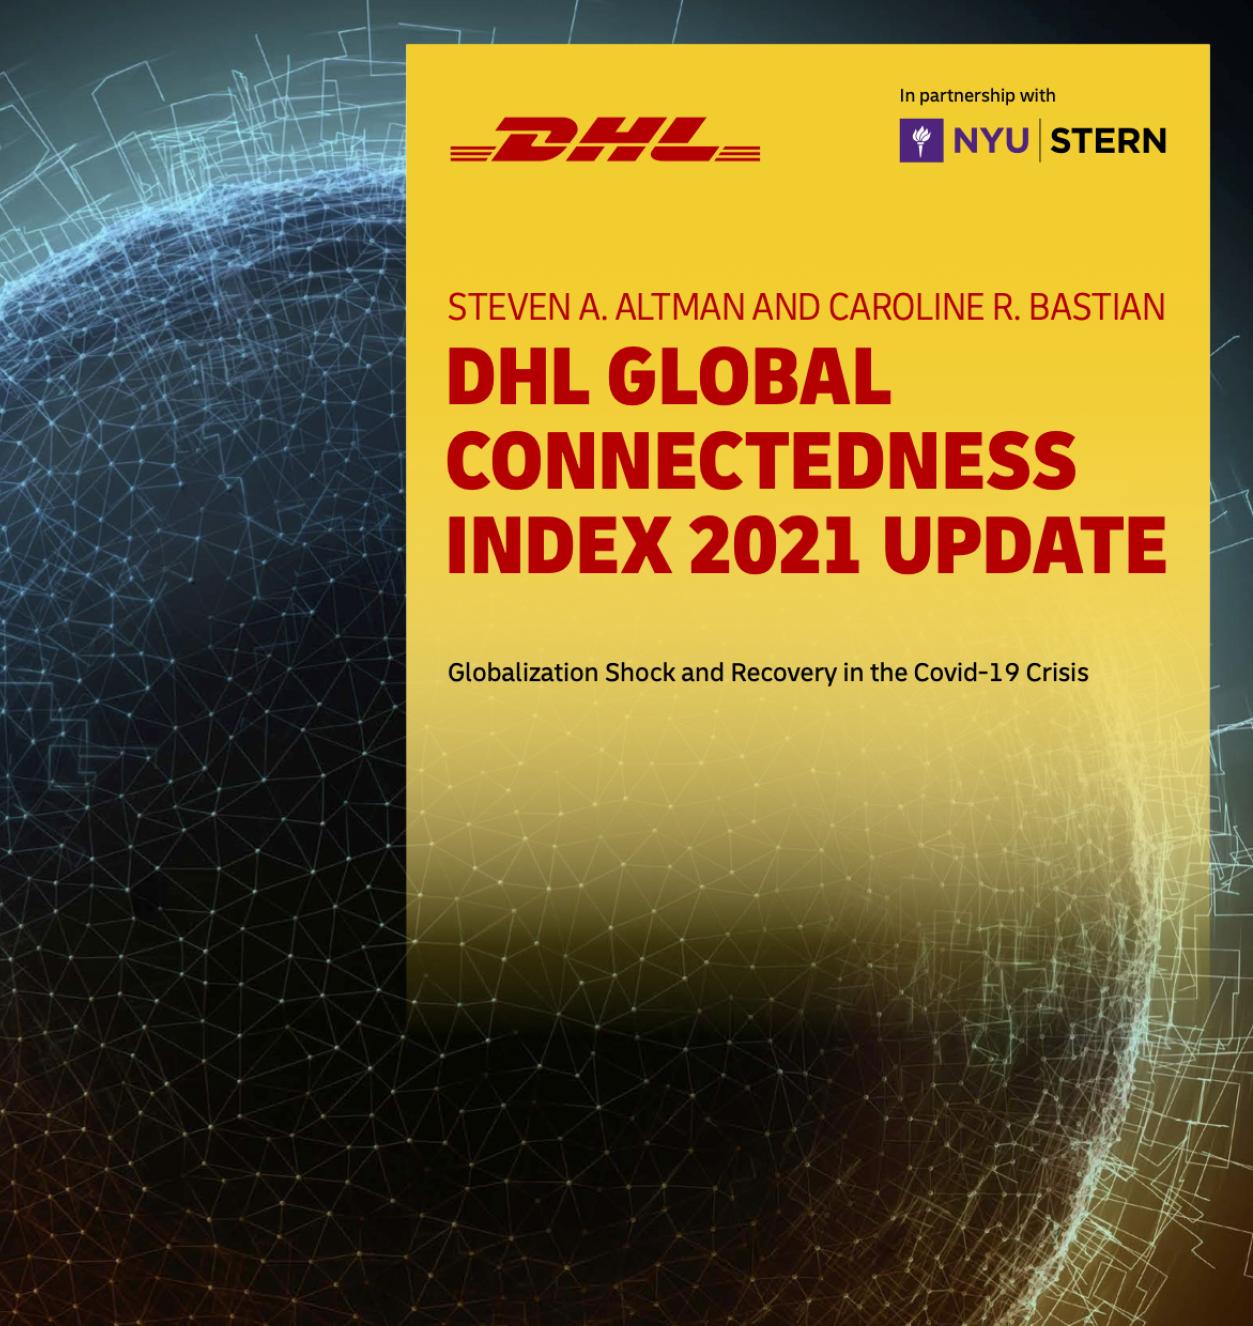 DHL Global Connectedness Index 2021 Update